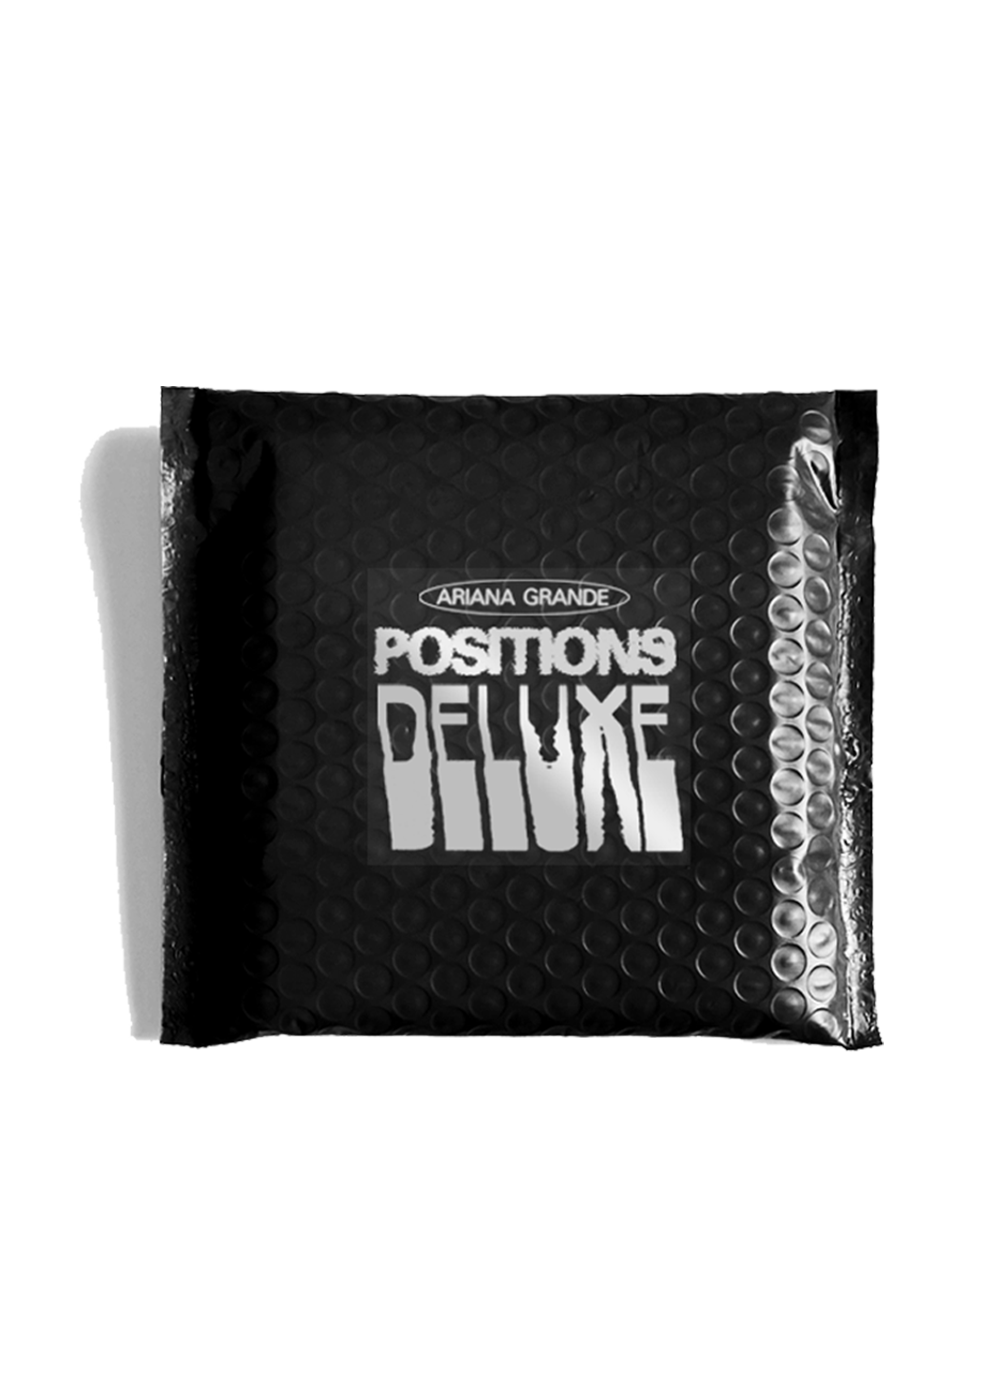 Positions Deluxe CD Box